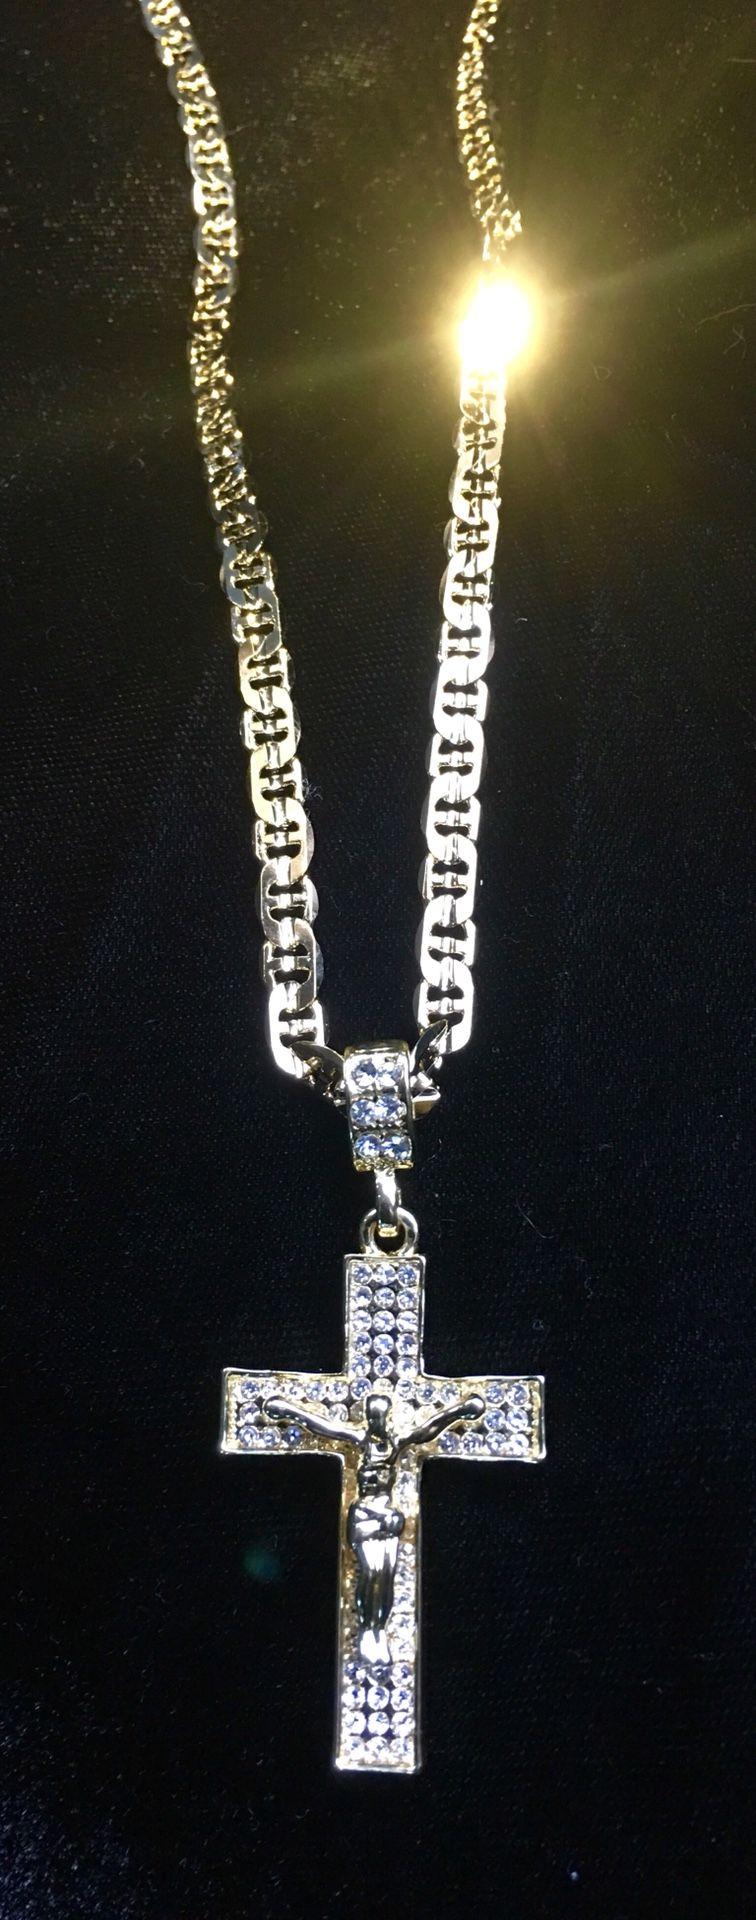 EXCLUSIVE CROSS 18K GOLD FULL DIAMONDS CZ NEW CHAIN MADE IN ITALY!